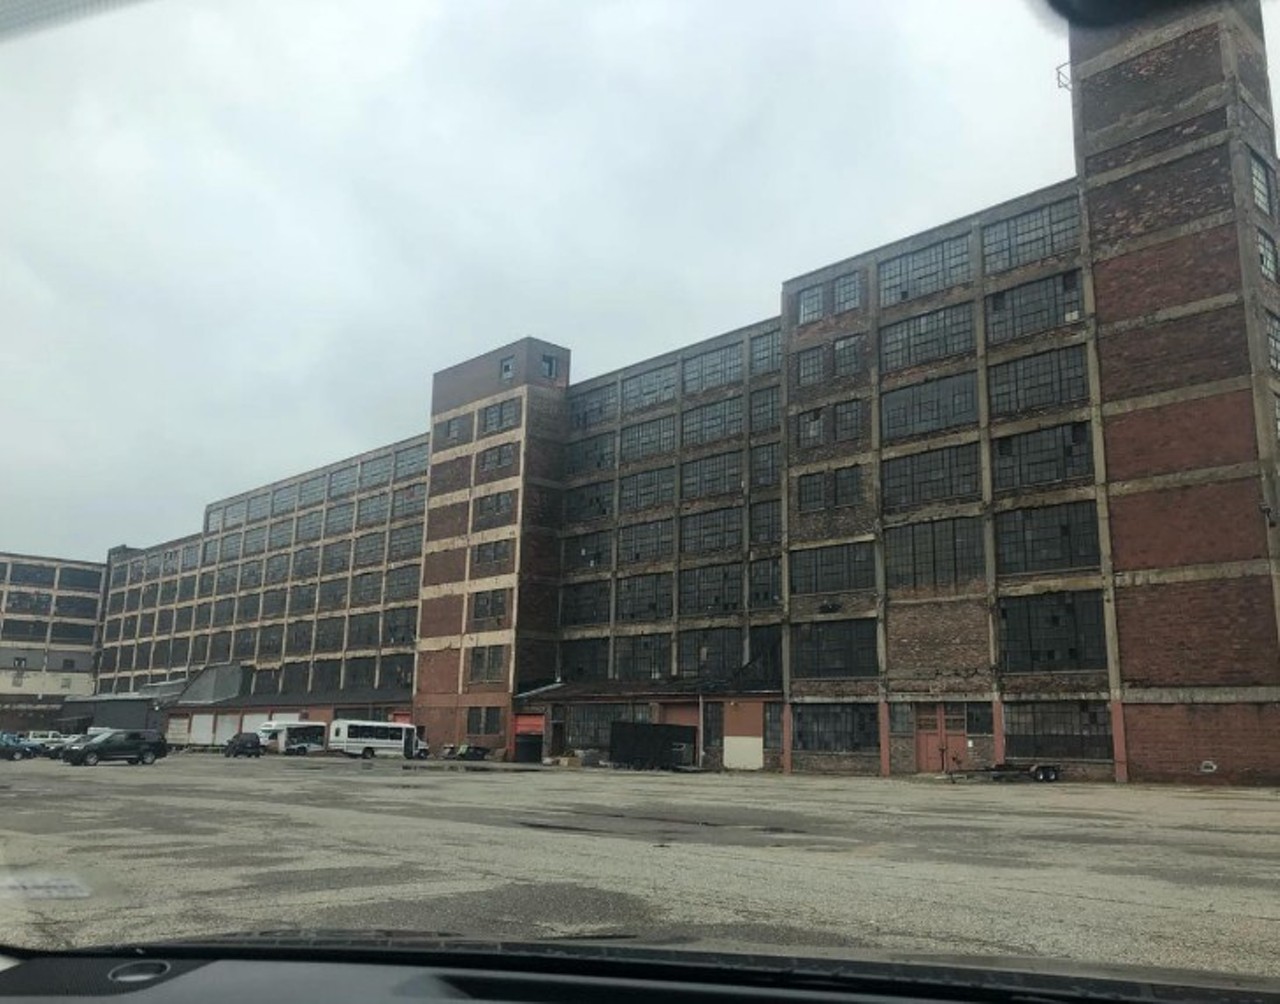 When you drive by a warehouse, you recall all the raves you've been to there 
If you&#146;ve never been texted an address, shown up to an abandoned warehouse, and had to run in a stampede when the police showed up, did you ever really party in Detroit?
Photo courtesy of @angee_michelle